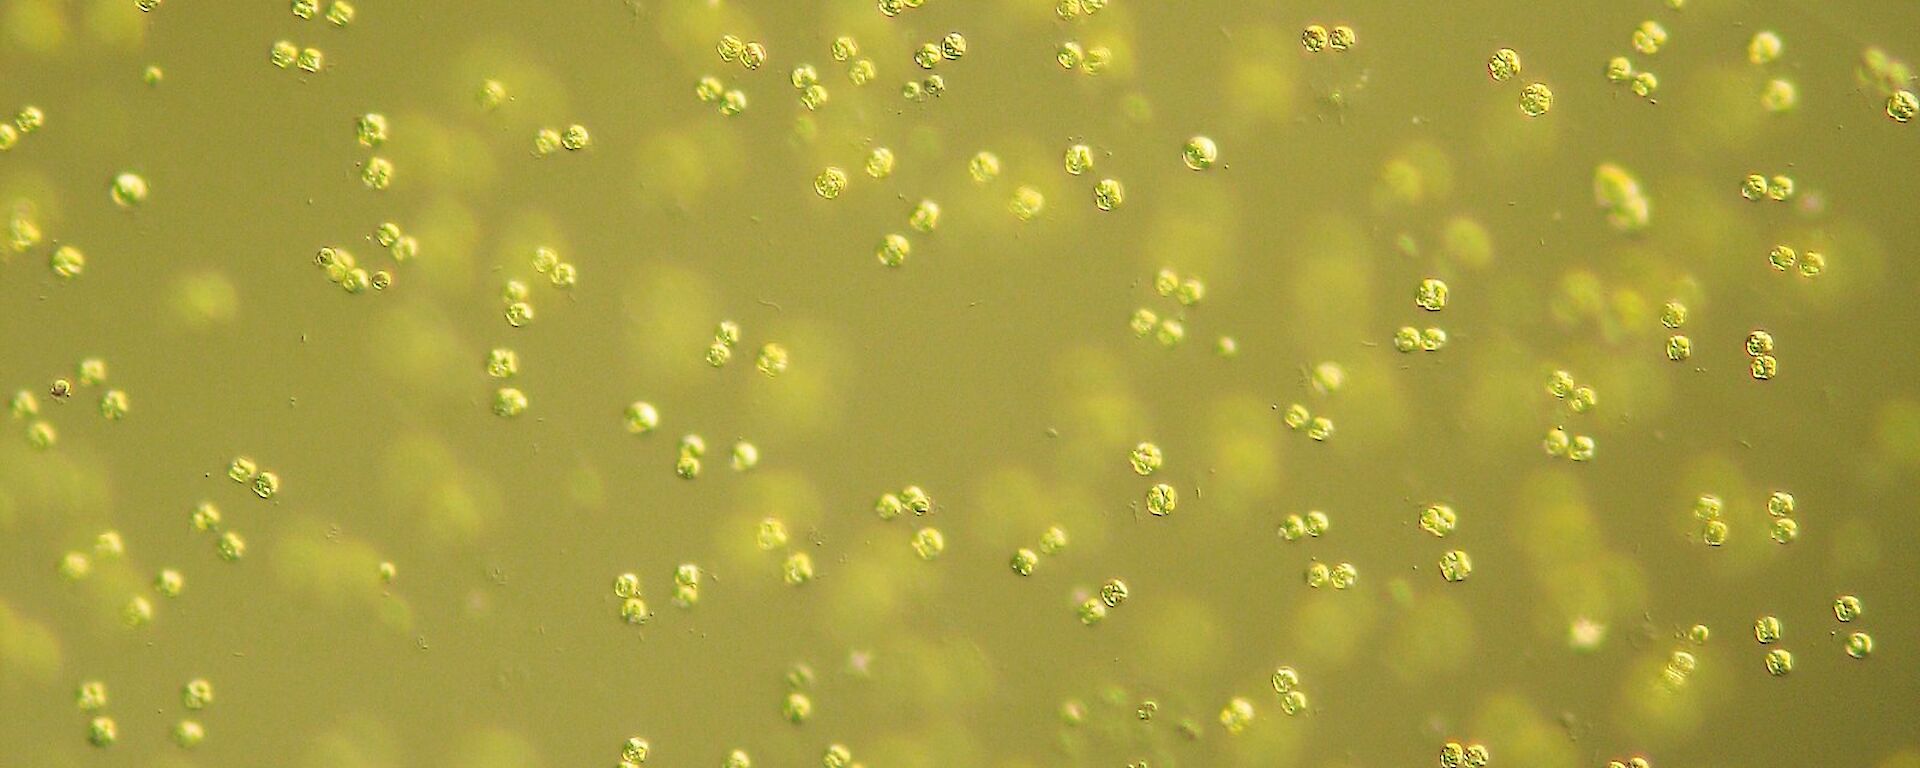 Colonies of the alga Phaeocystis can be several centimetres in diameter and contain thousands of individual cells which are about 5 µm in diameter.